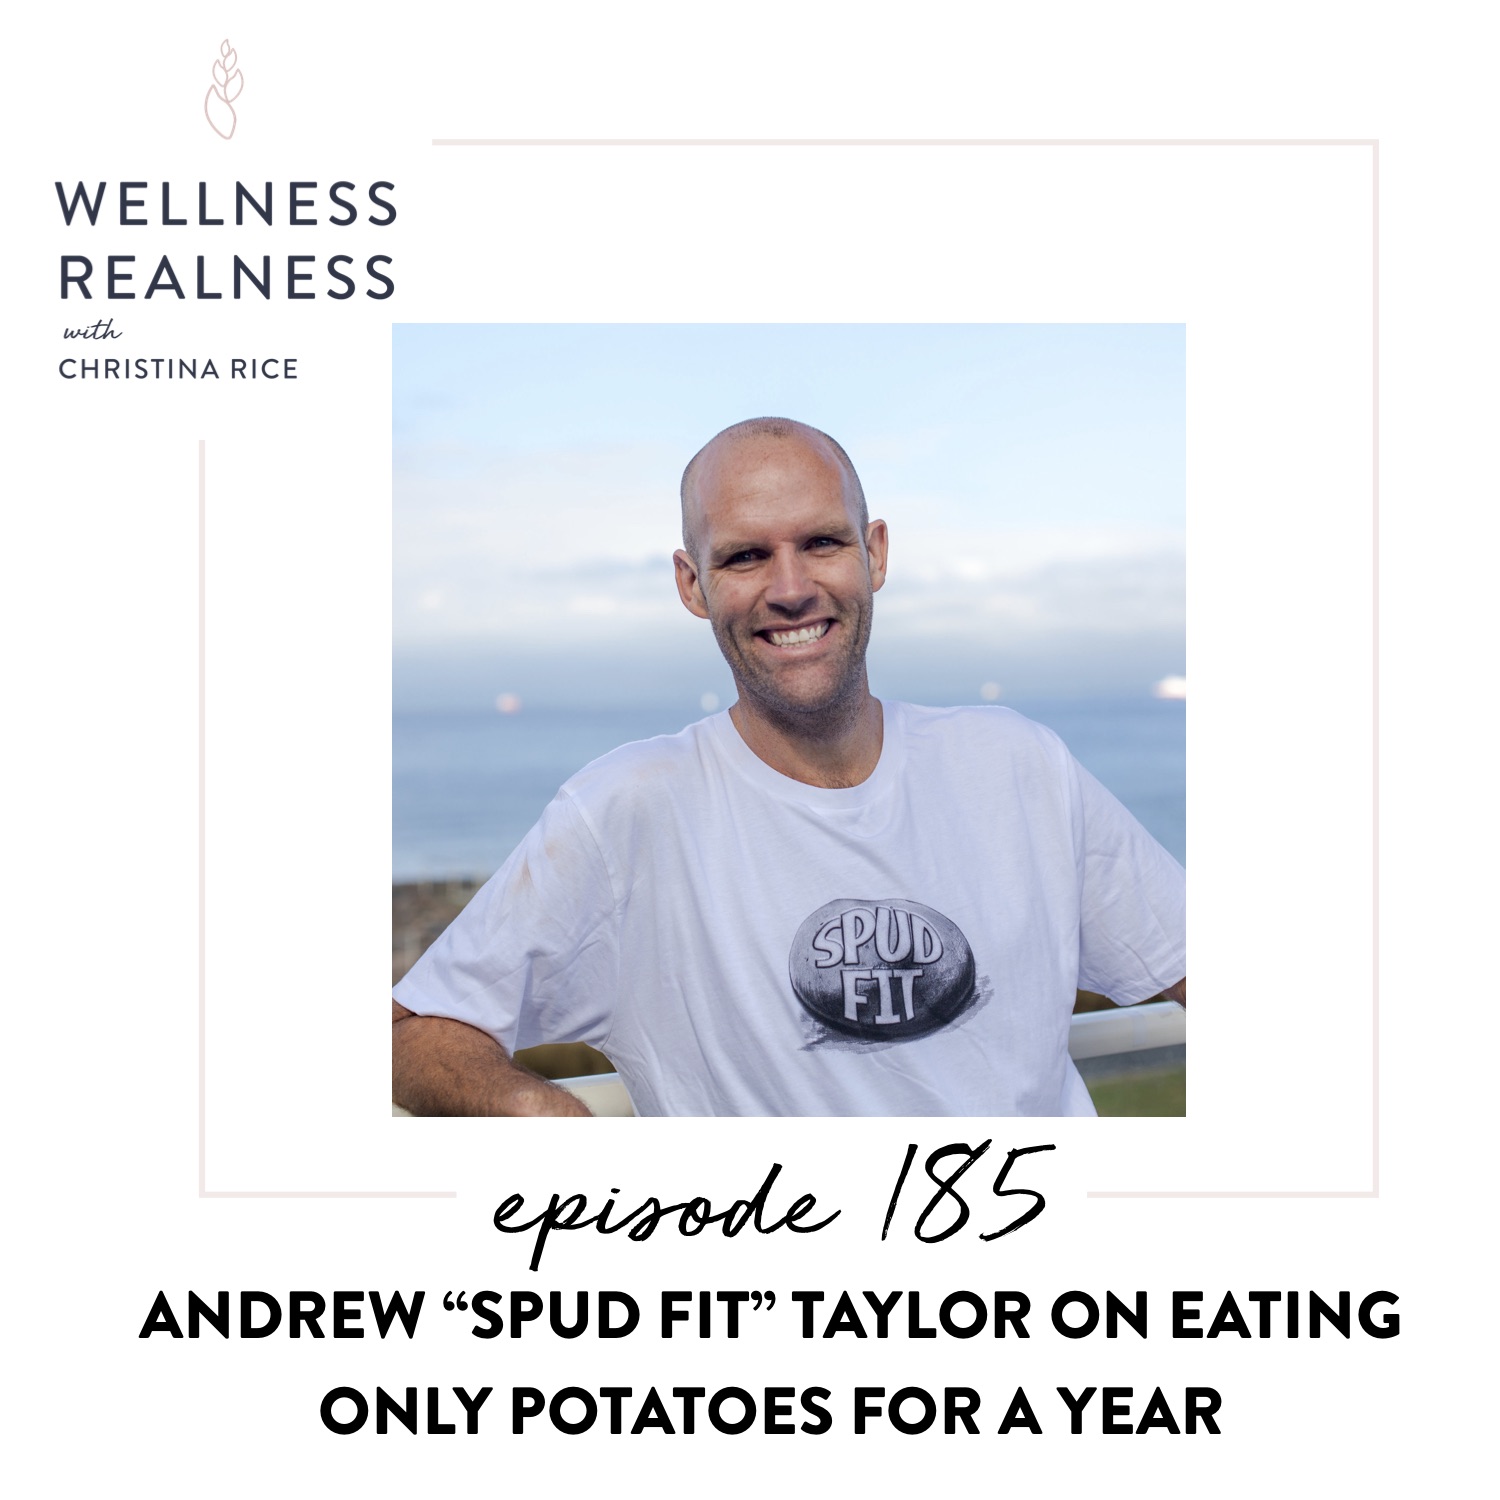 185: Andrew “Spud Fit” Taylor on Eating Only Potatoes for a Year